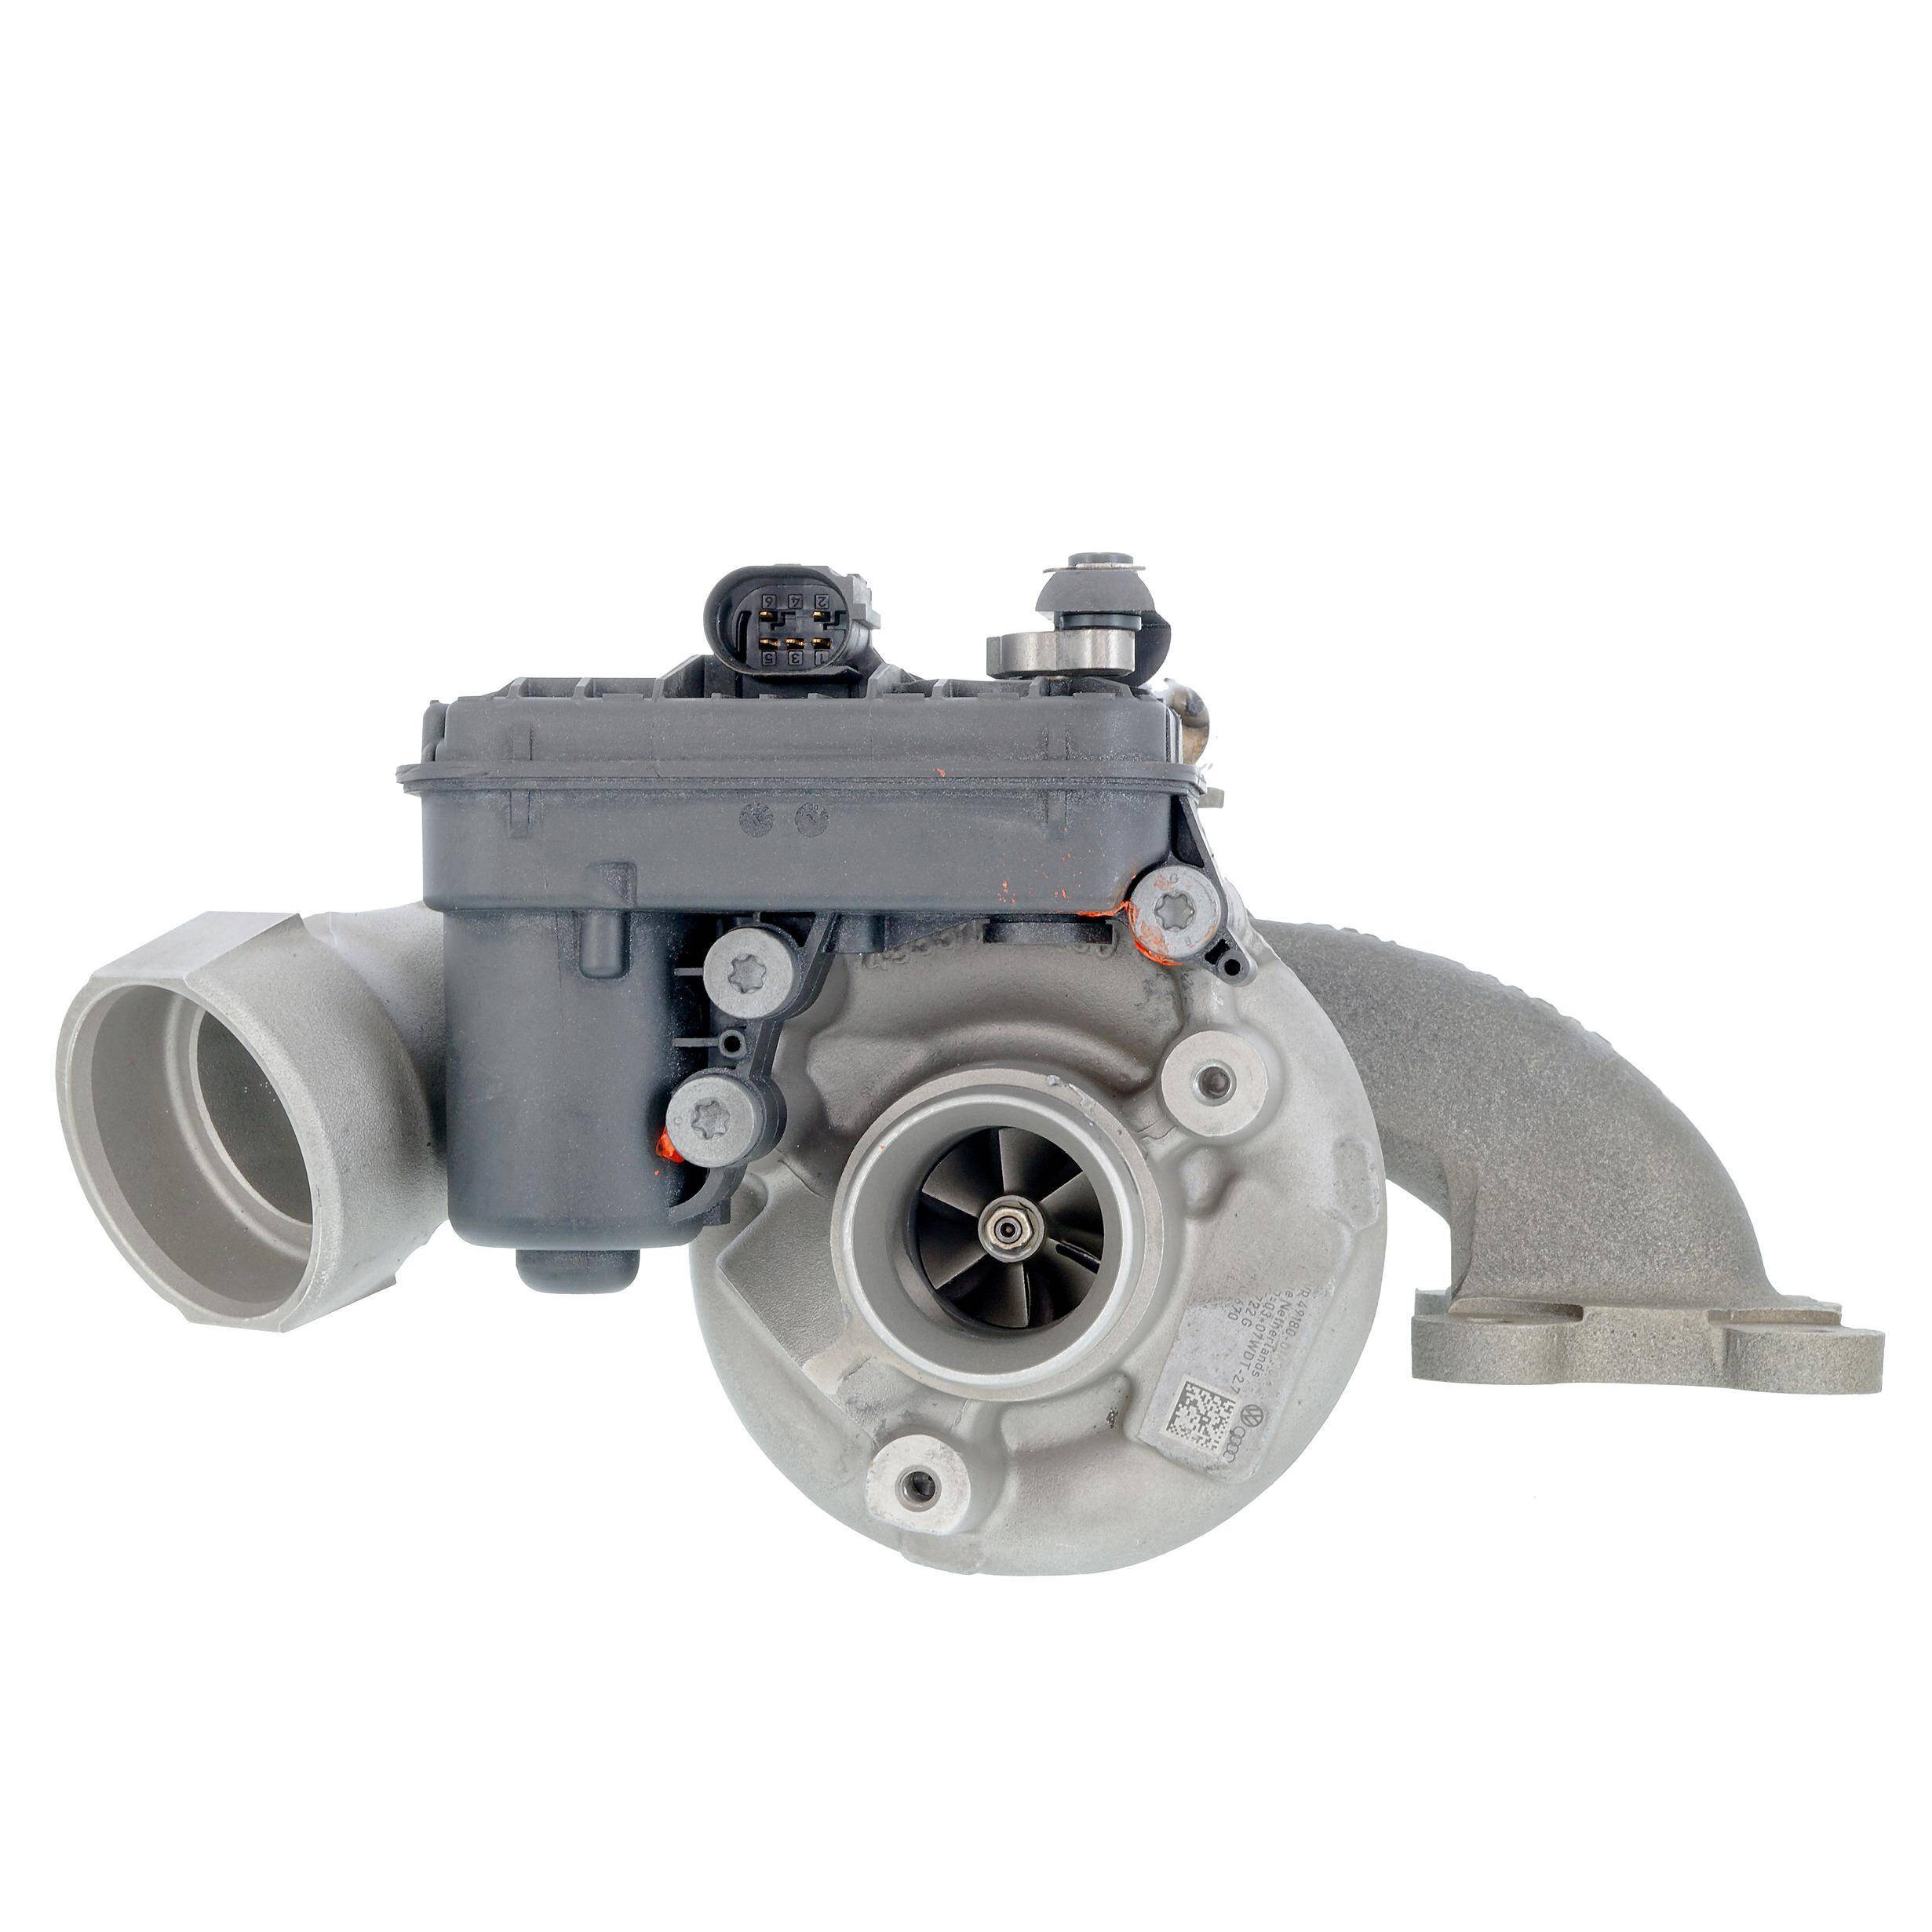 TURBOCHARGER TURBO REMANUFACTURED 49180-01430 49180-01430 49180-01430